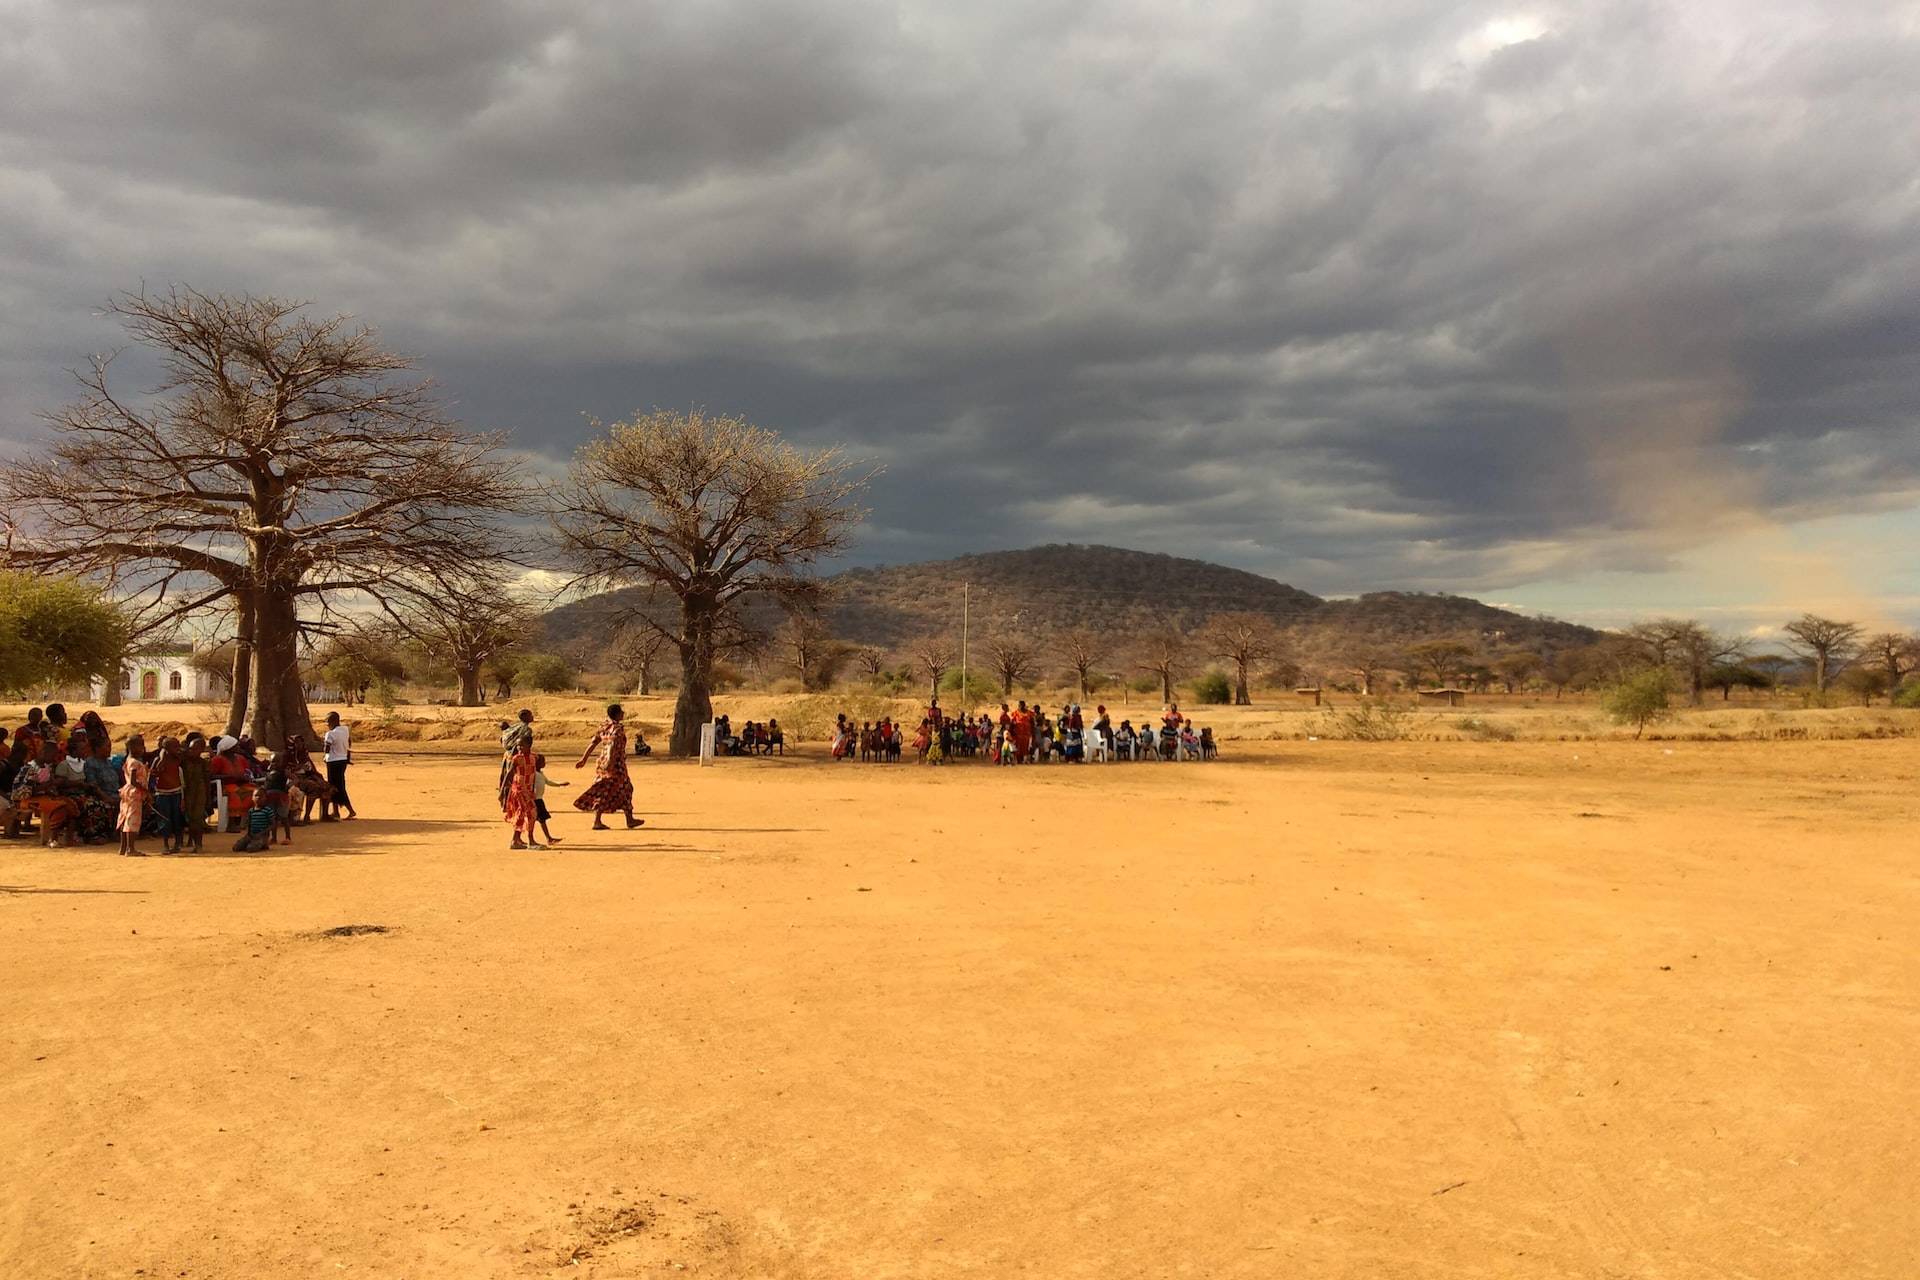 people on brown field near trees under cloudy sky during daytime